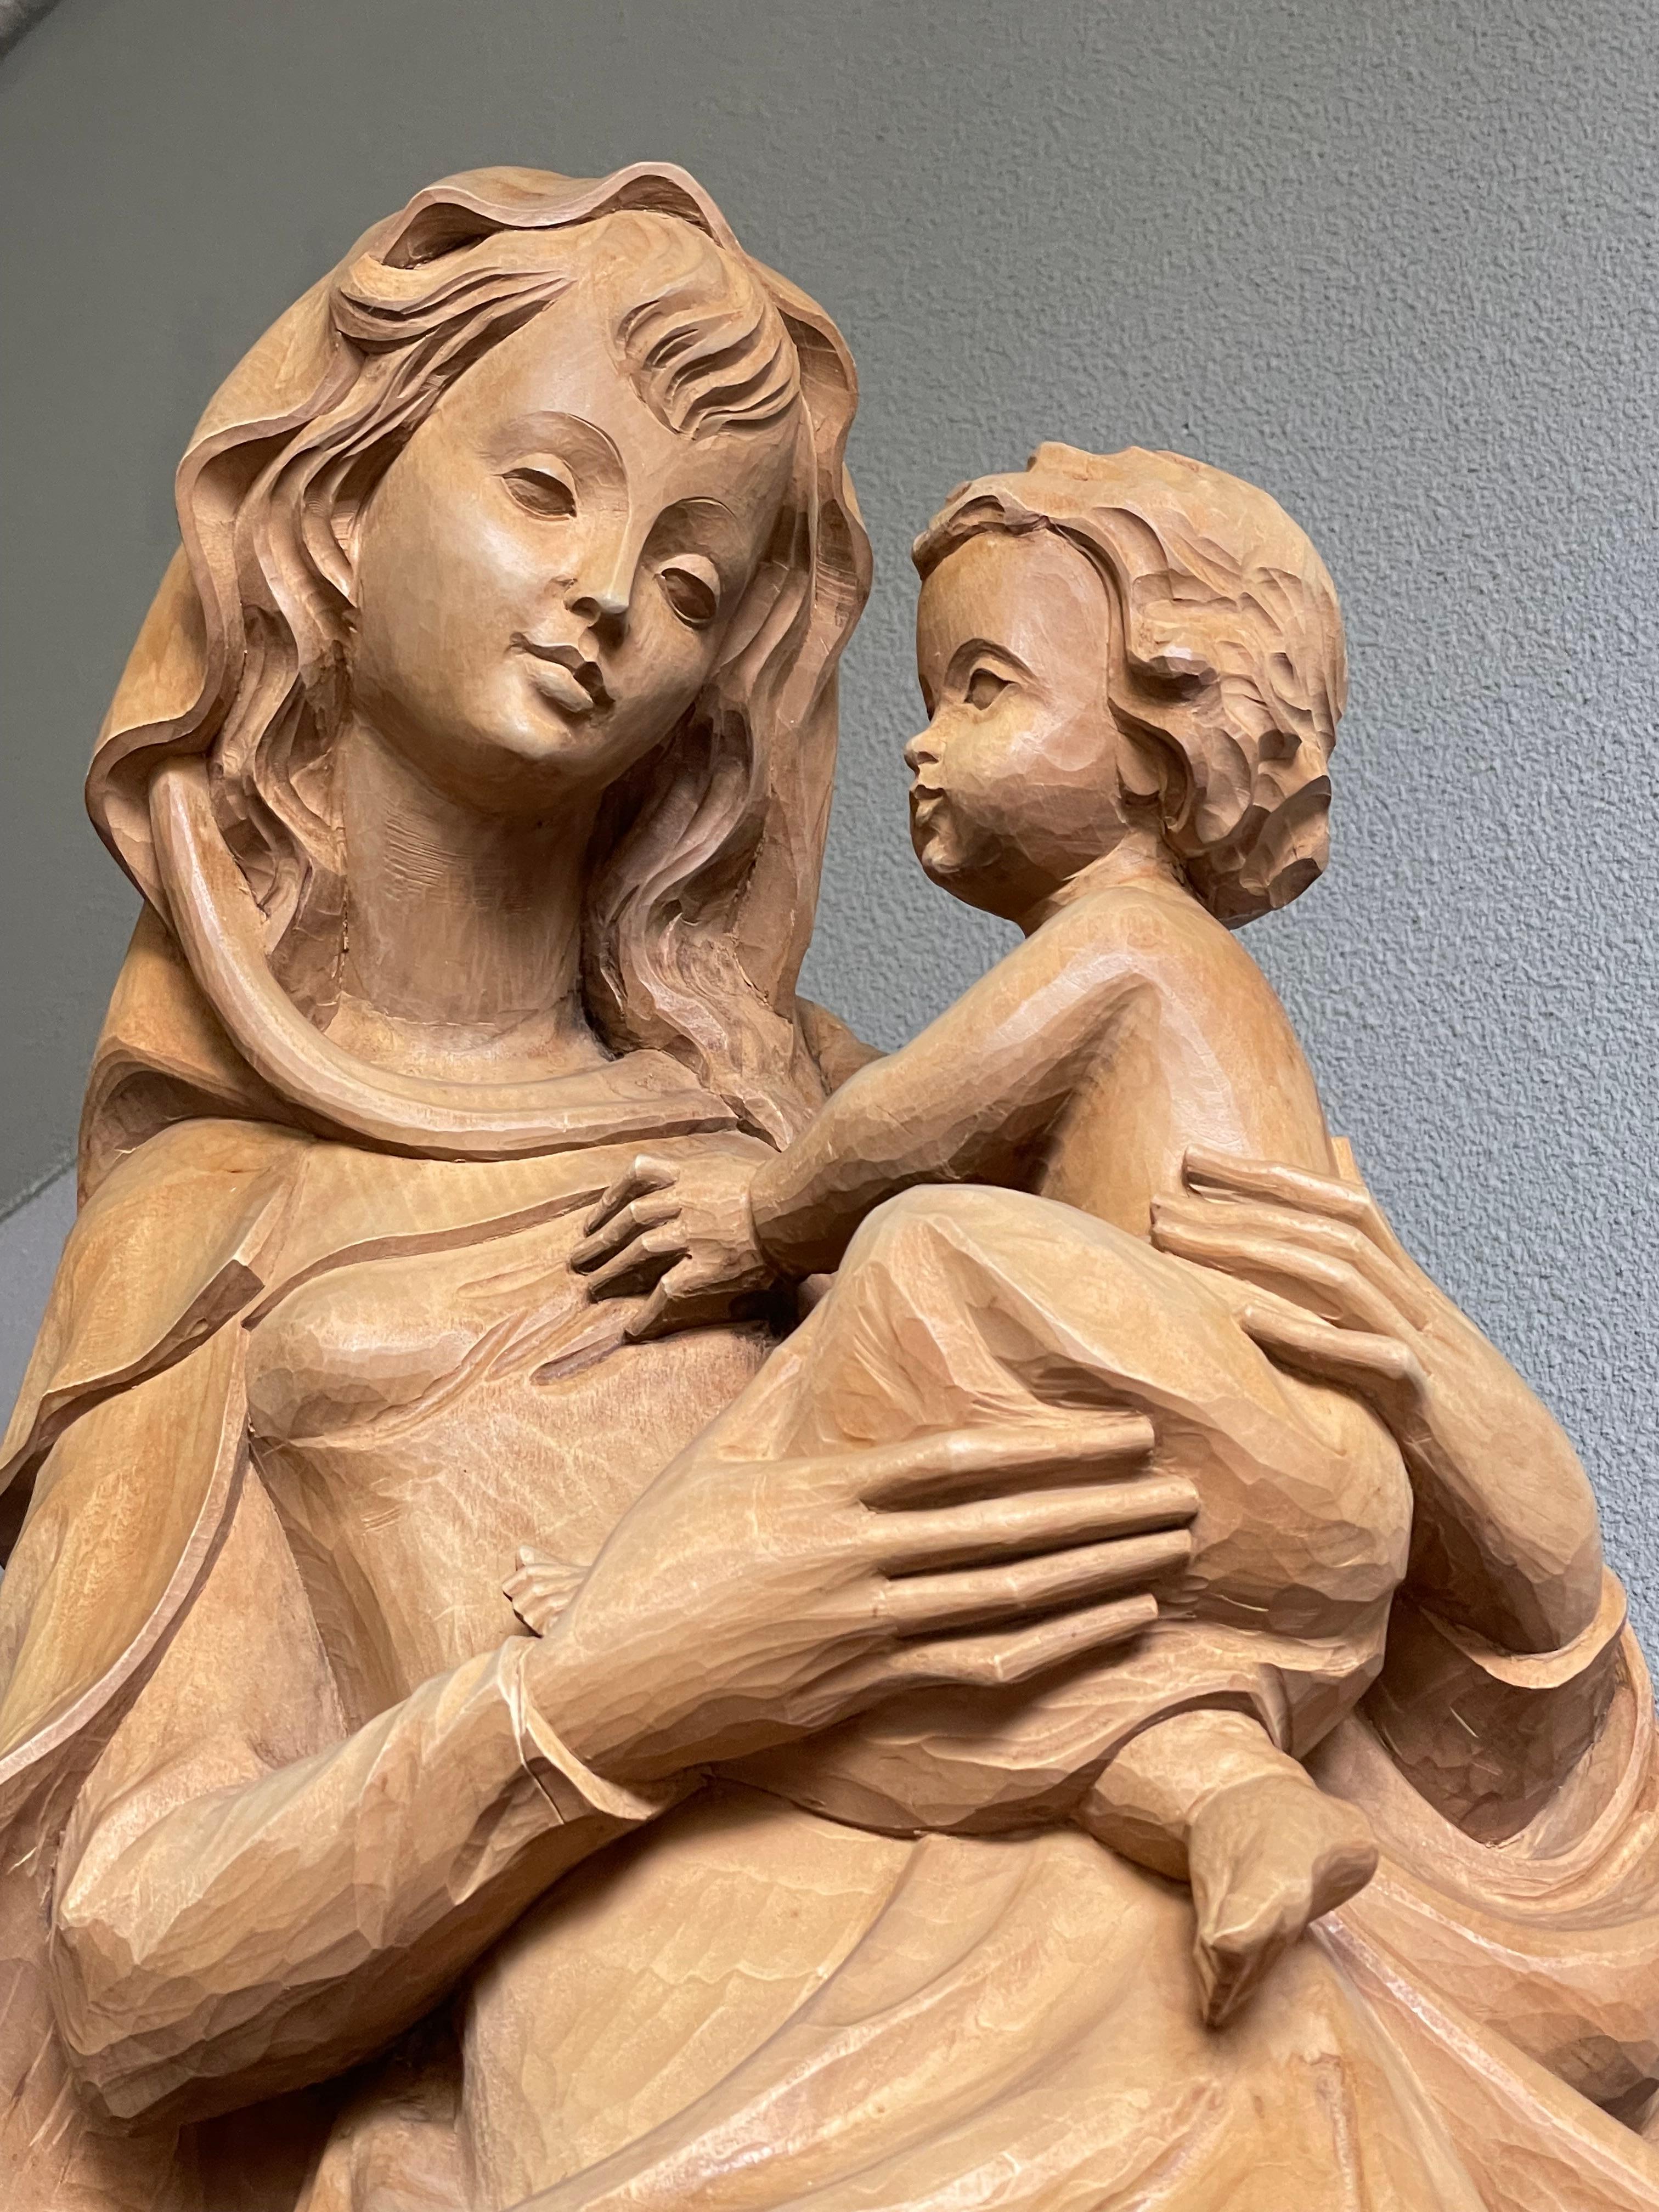 Hand-Crafted Large Jugendstil Style Hand Carved Wooden Sculpture of Mary and Child Jesus For Sale